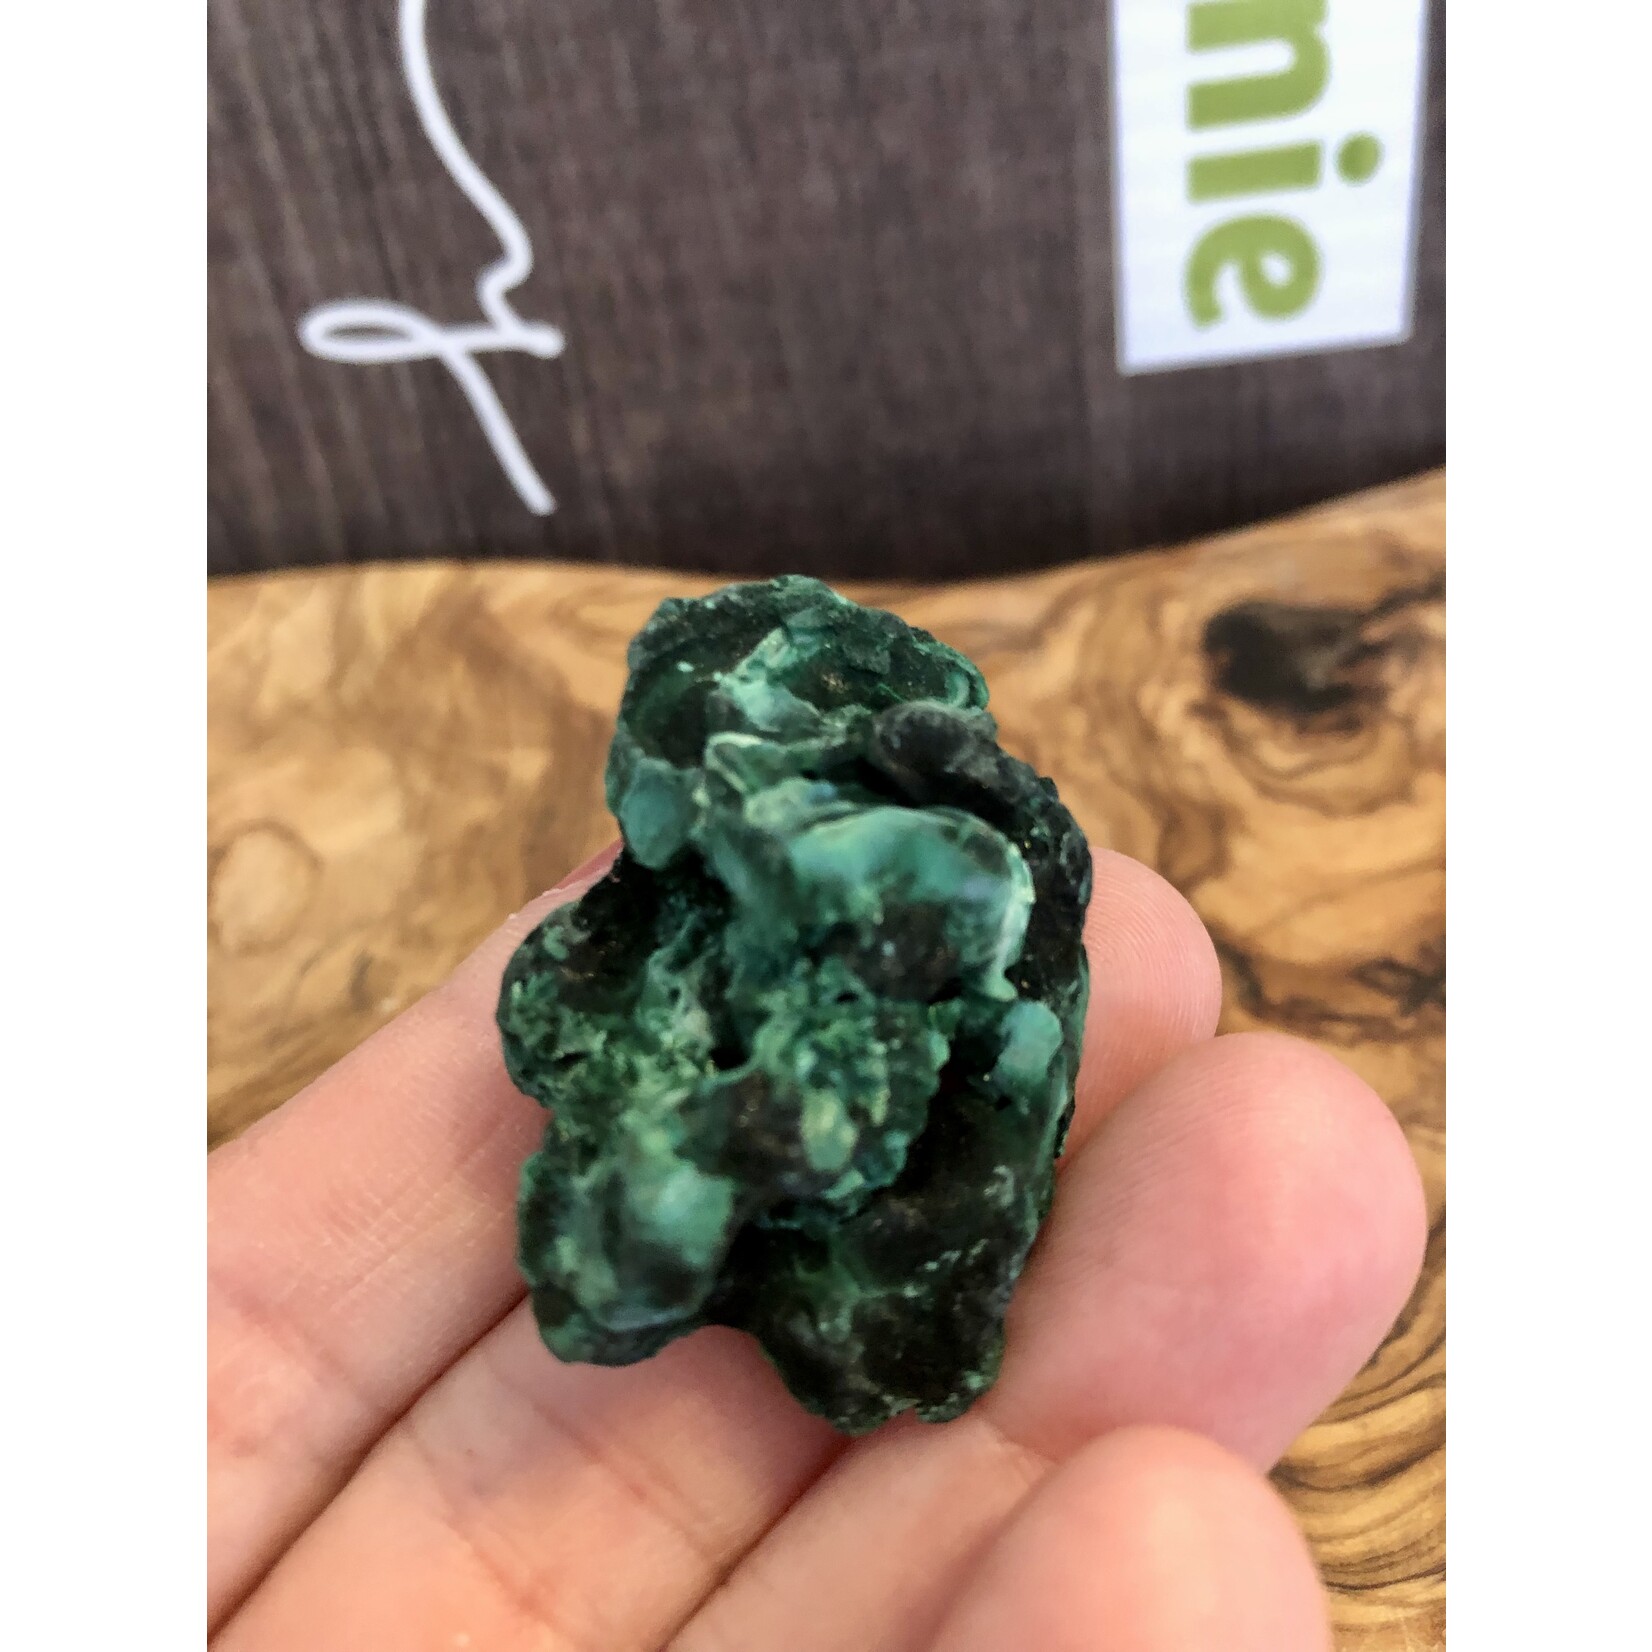 superbs malachite pieces, green mineral of excellent quality, reduces muscle pain, calms menstrual pain